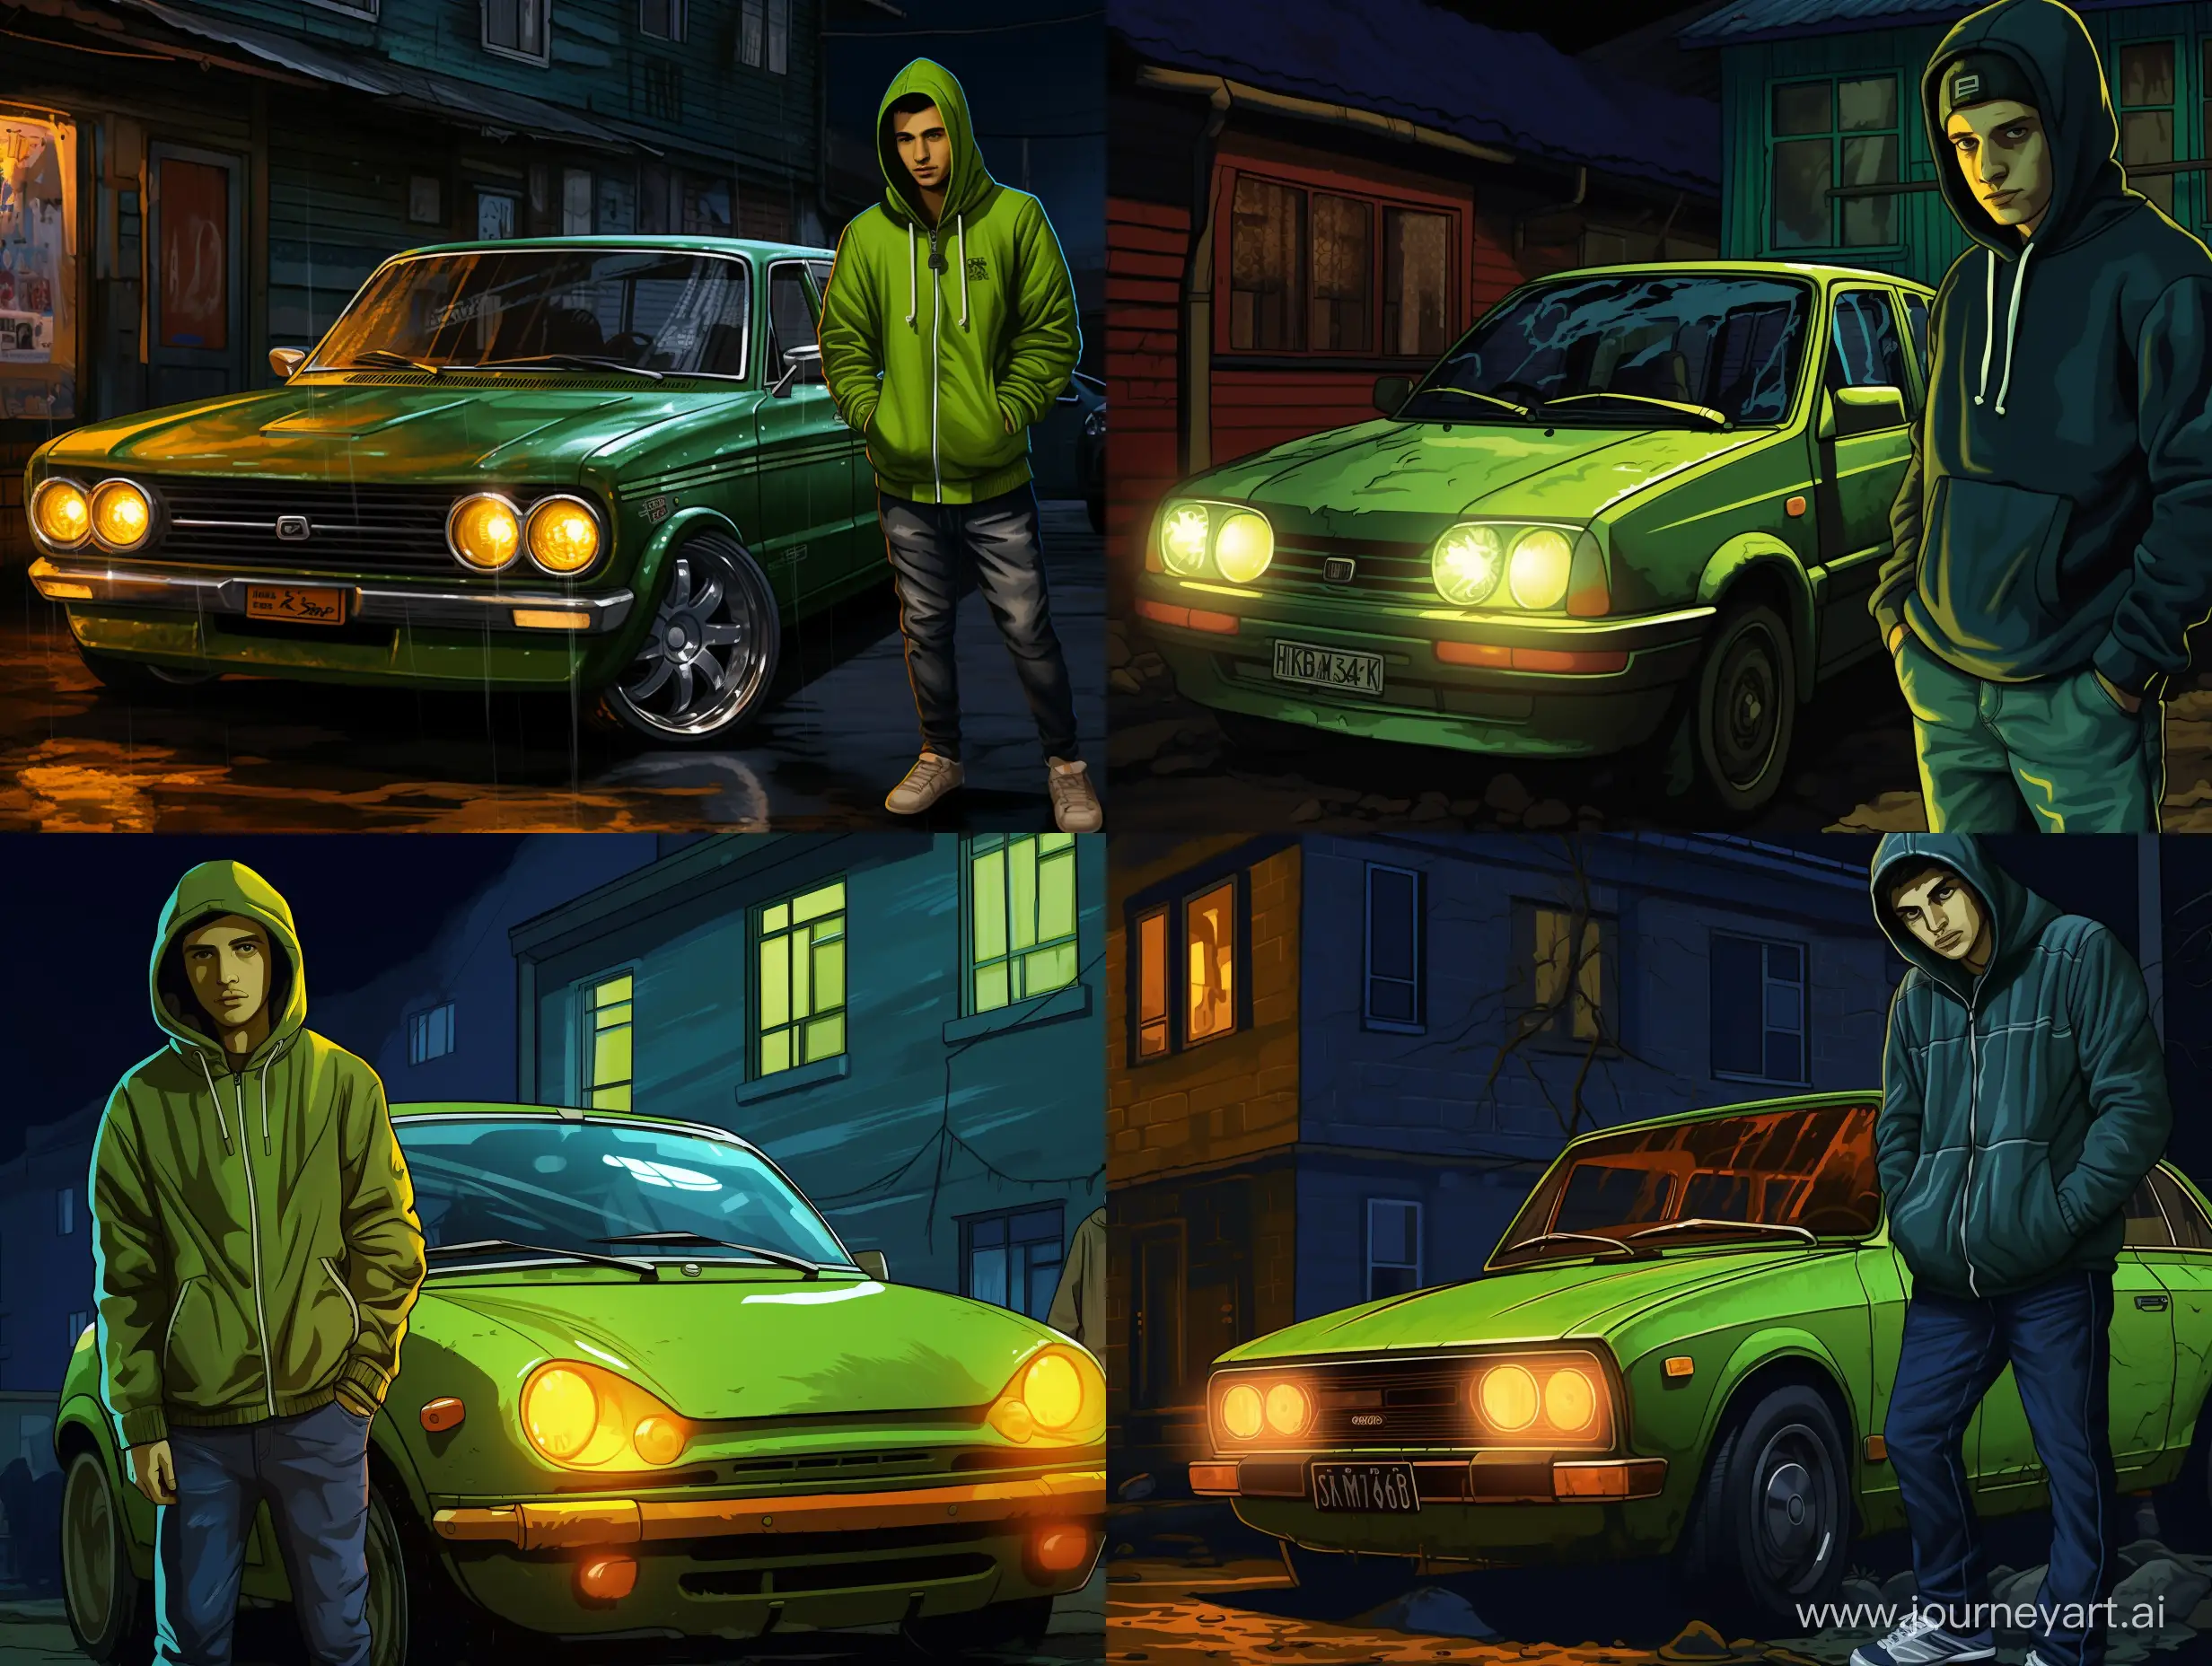 A fat teenager weared in green hoodie with japanese word print in middle of hoodie is standing next to an old model of a green dacia solenza. The yellow halogen headlights of this car shine brightly. The action takes place on a dark street in a residential area of an Eastern European city